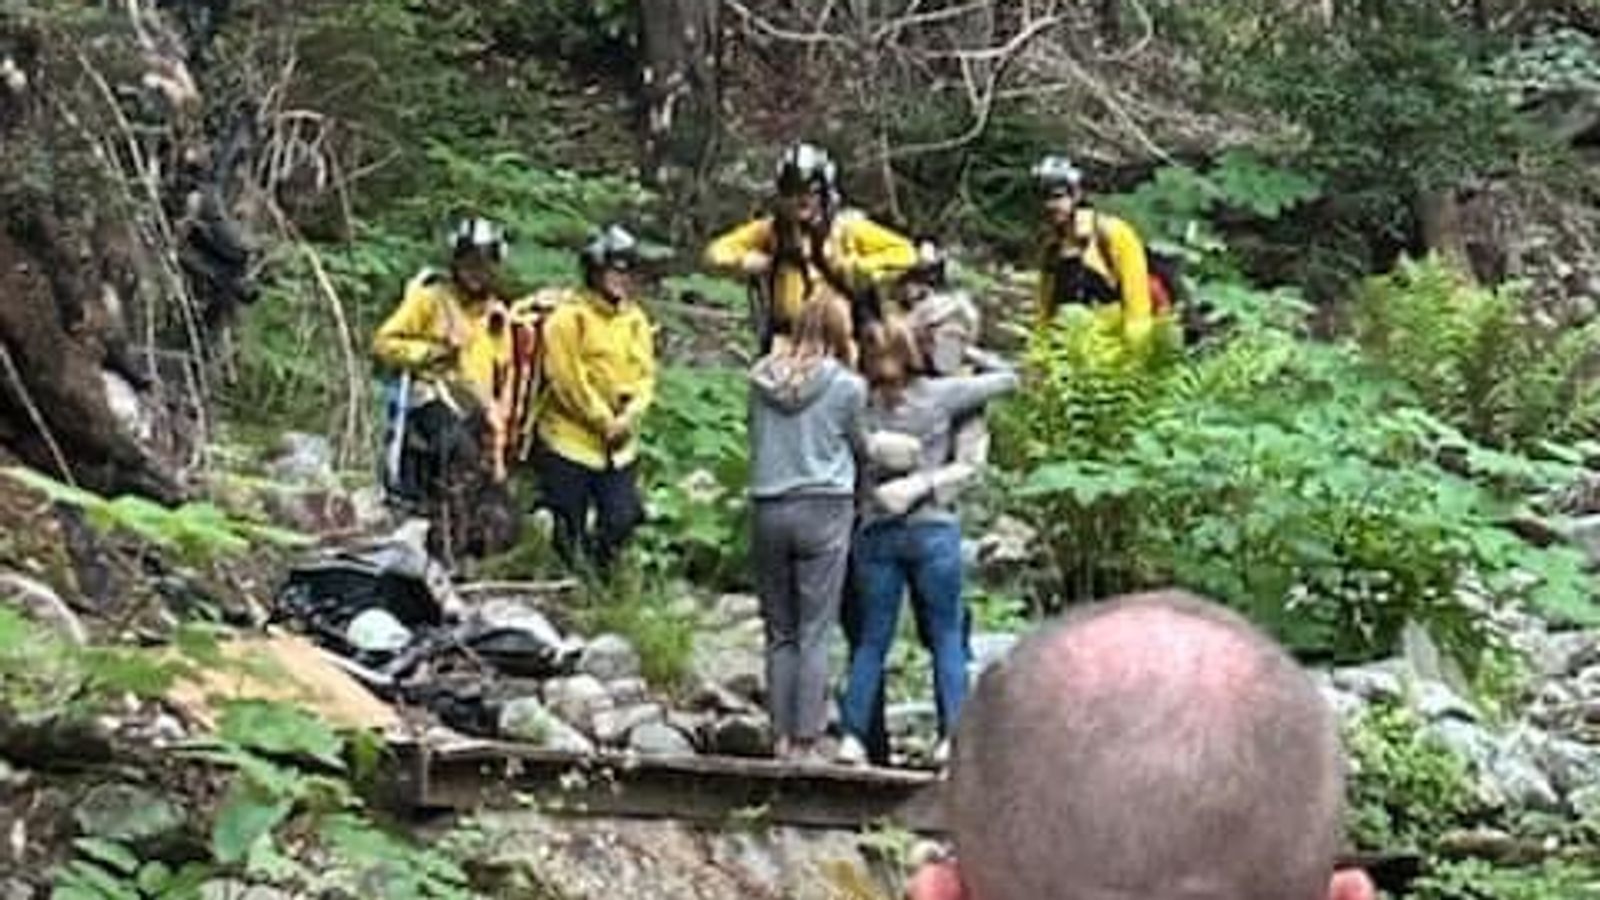 Man found after 10 days lost in California woods tells how he survived